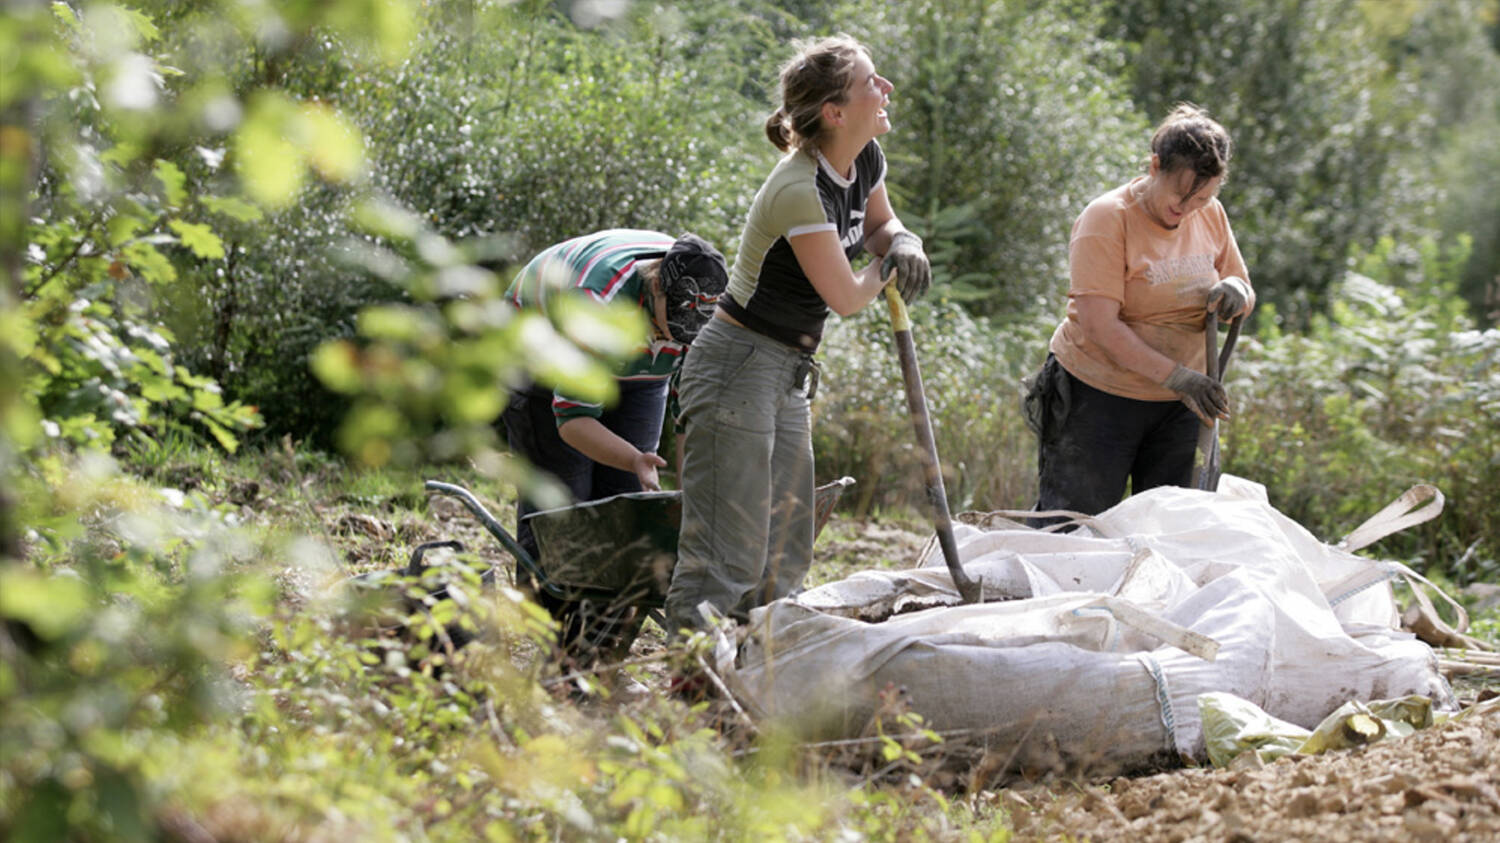 A group of people are working in a woodland, clearing material into large sacks. A lady leans against a rake in the foreground, taking a brief rest.